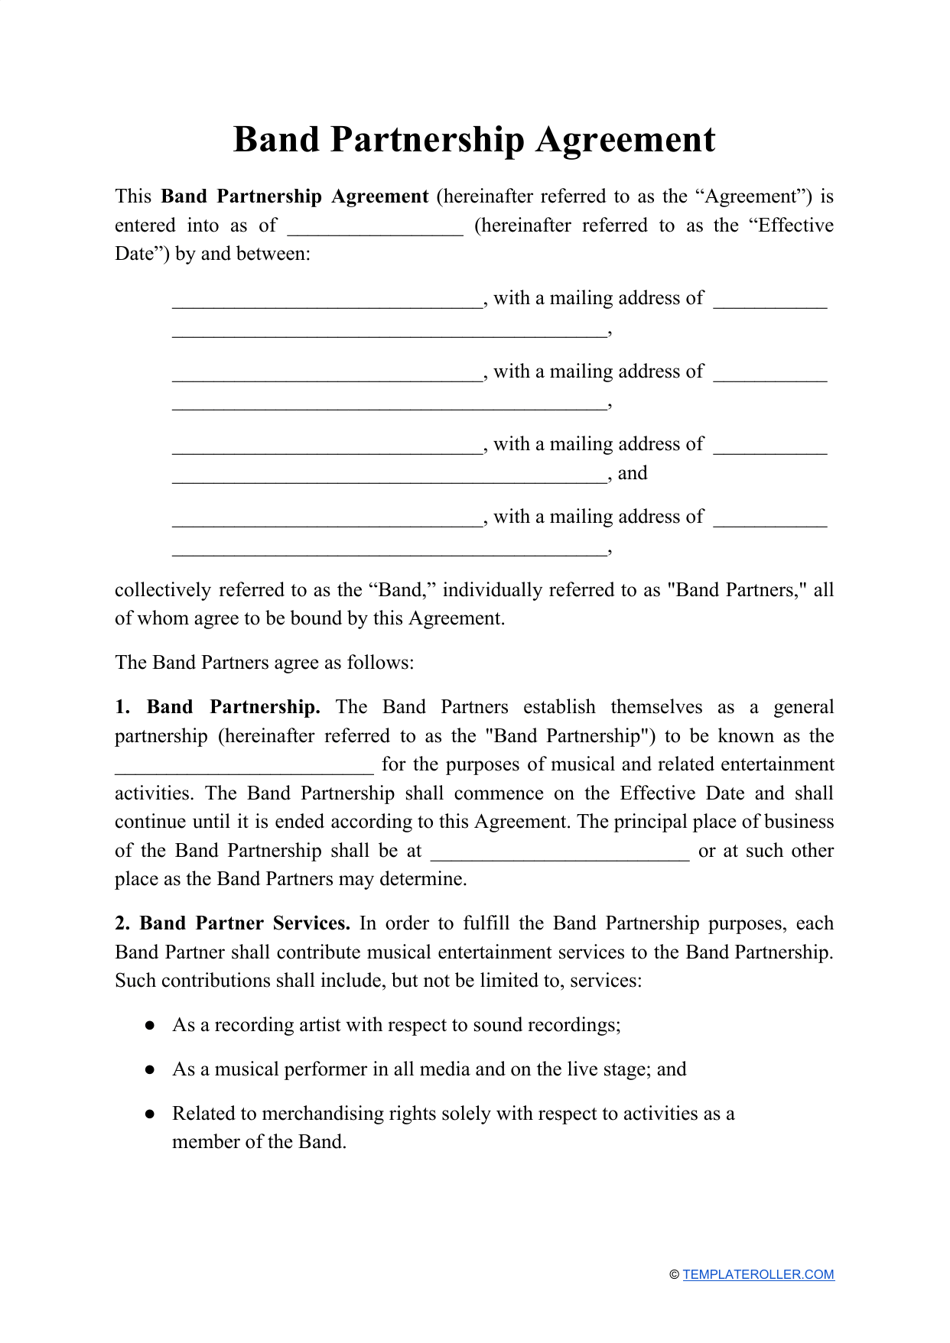 Band Partnership Agreement Template, Page 1